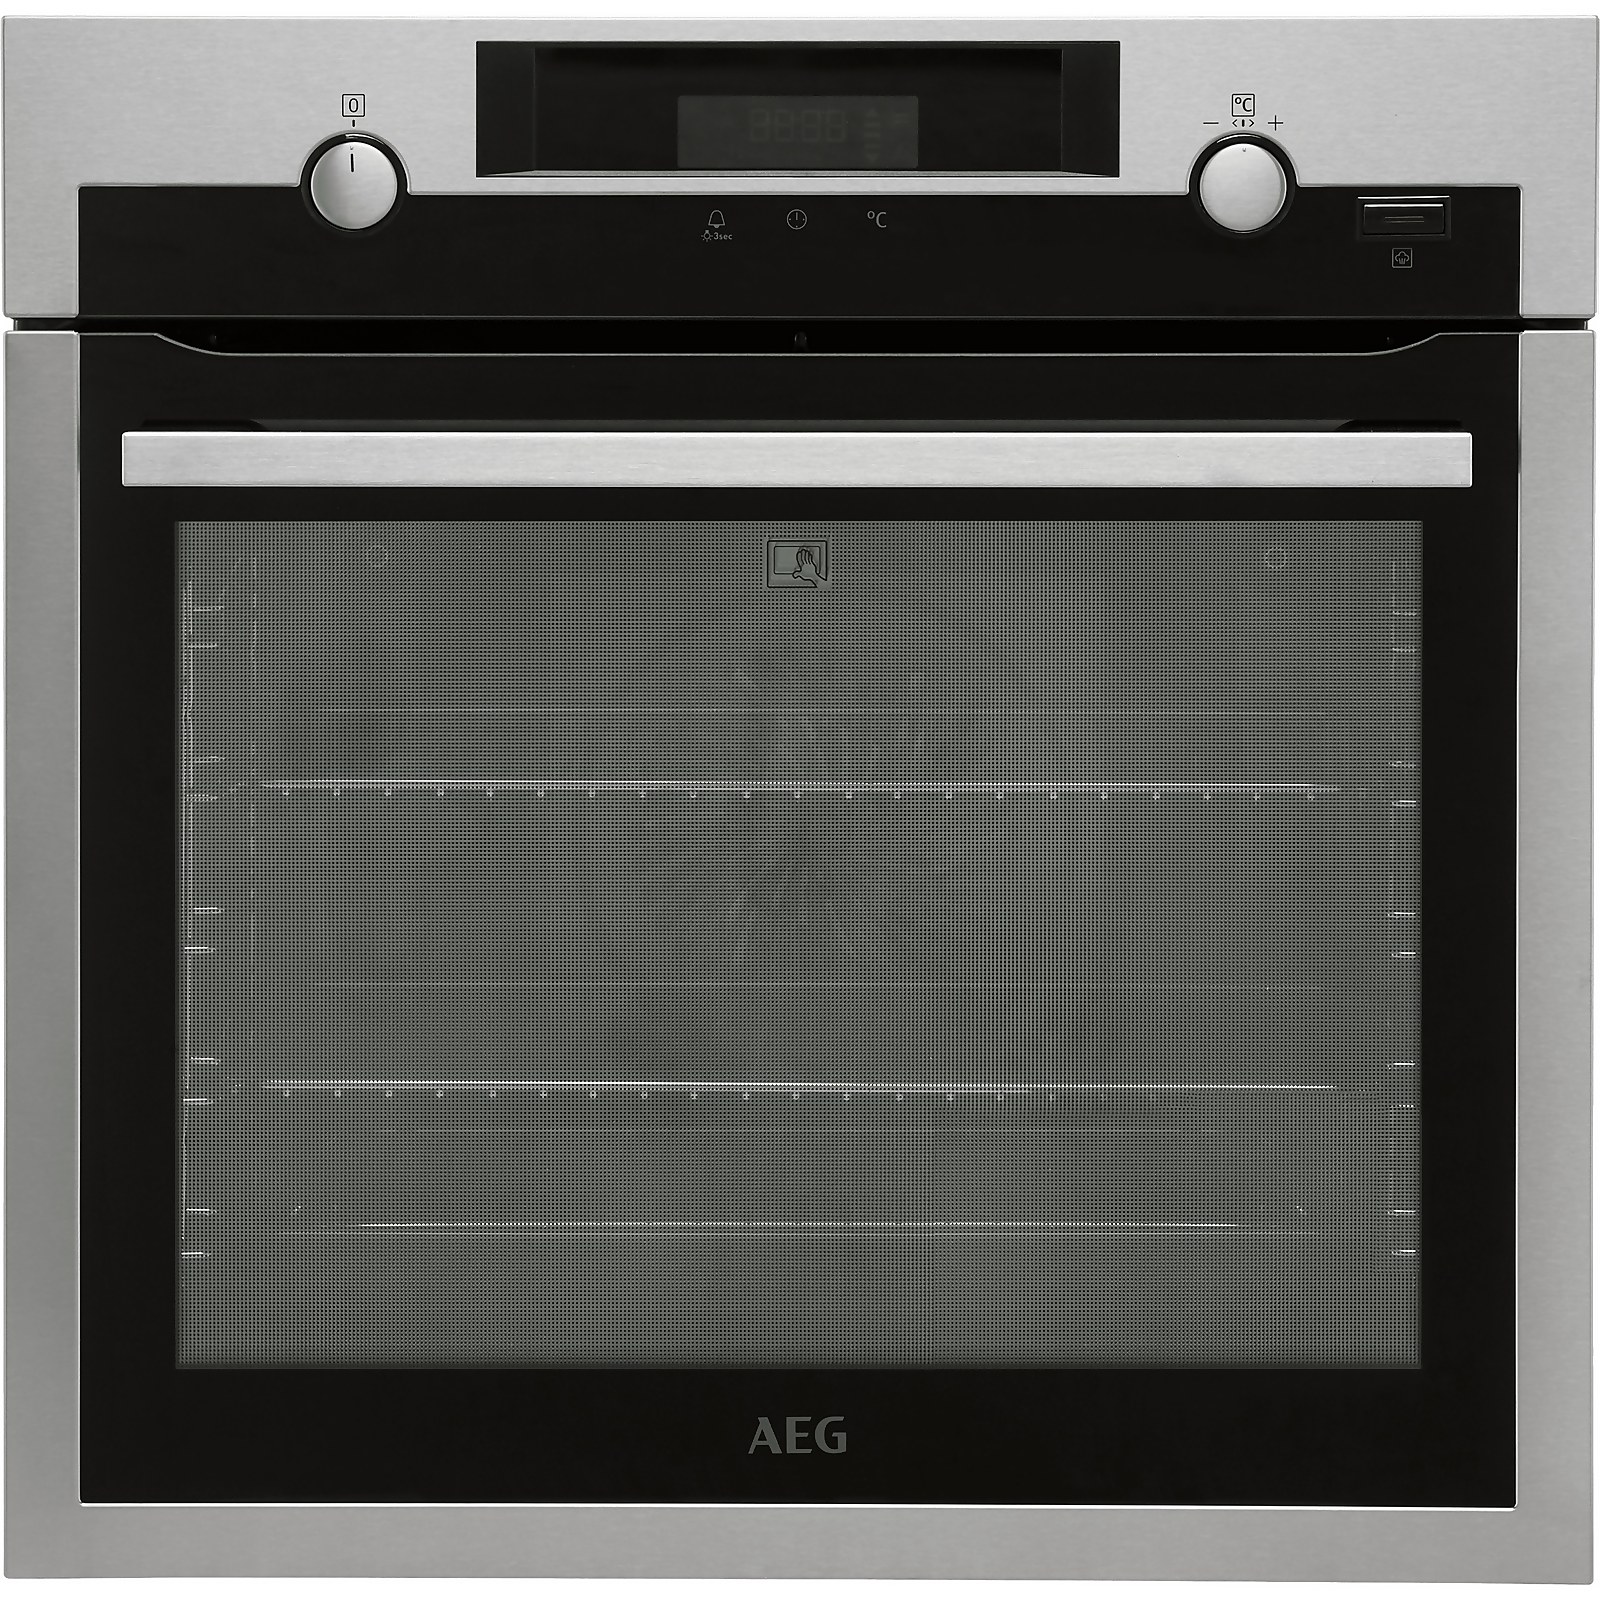 Photo of Aeg Bps556020m Built In Electric Single Oven - Stainless Steel / Black